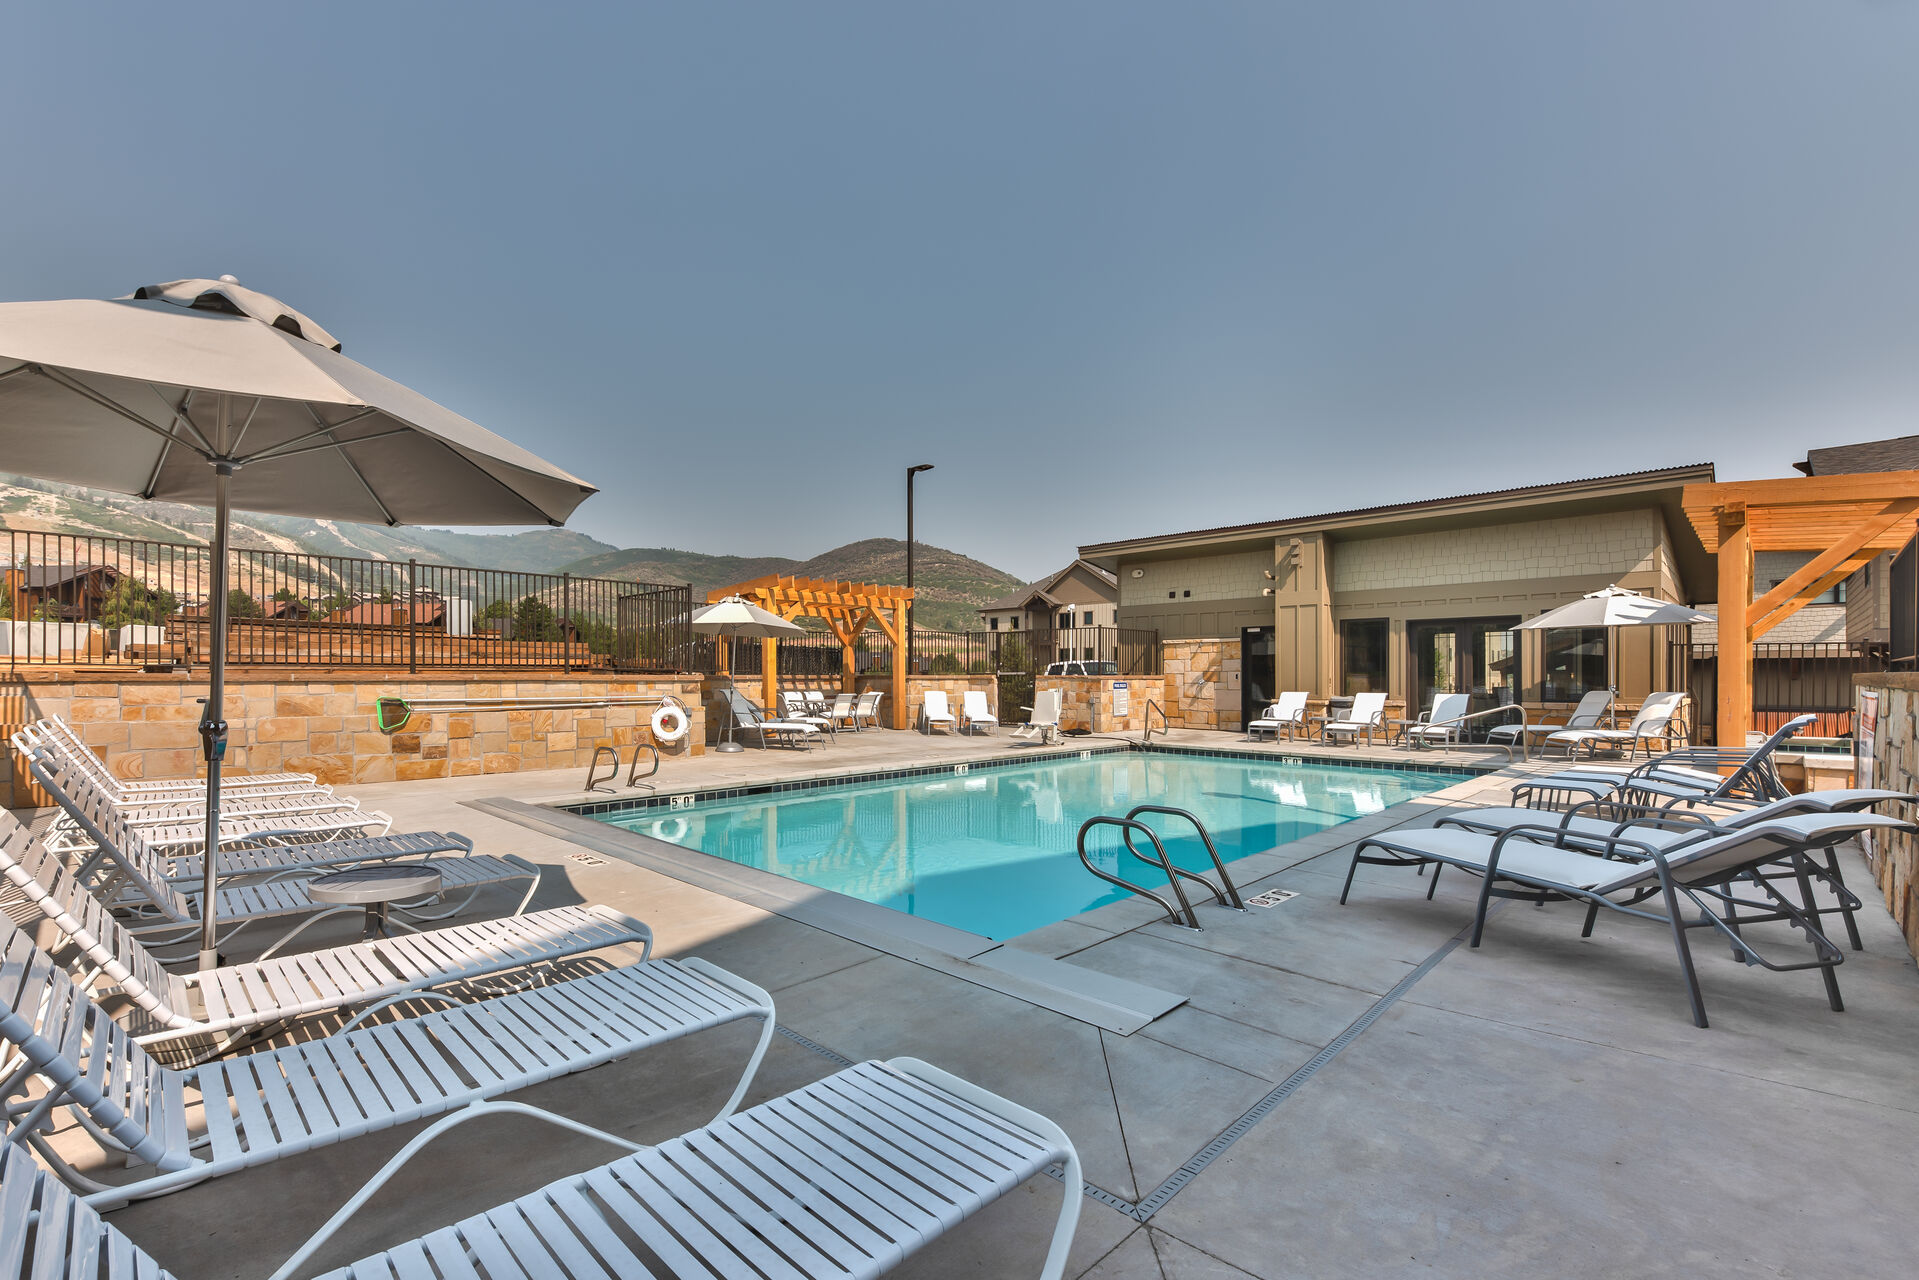 Community Heated Pool and Hot Tub Open Year Round